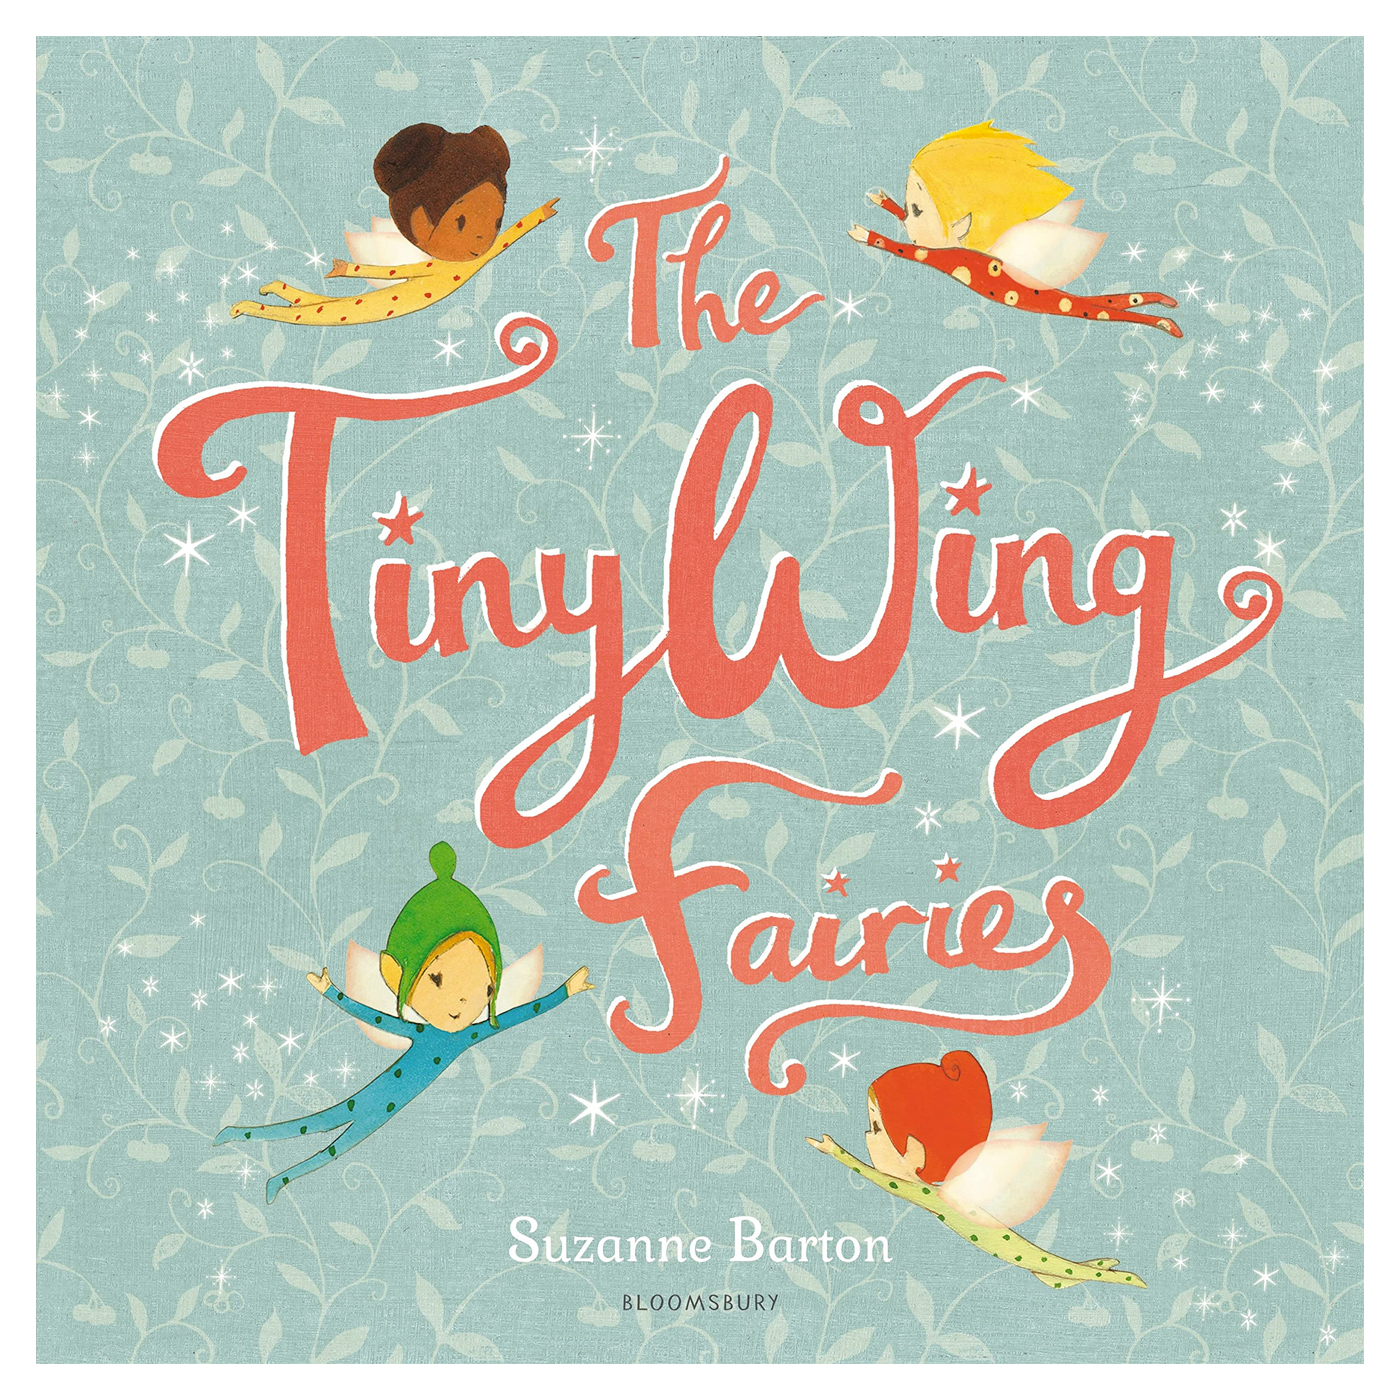  The Tinywing Fairies